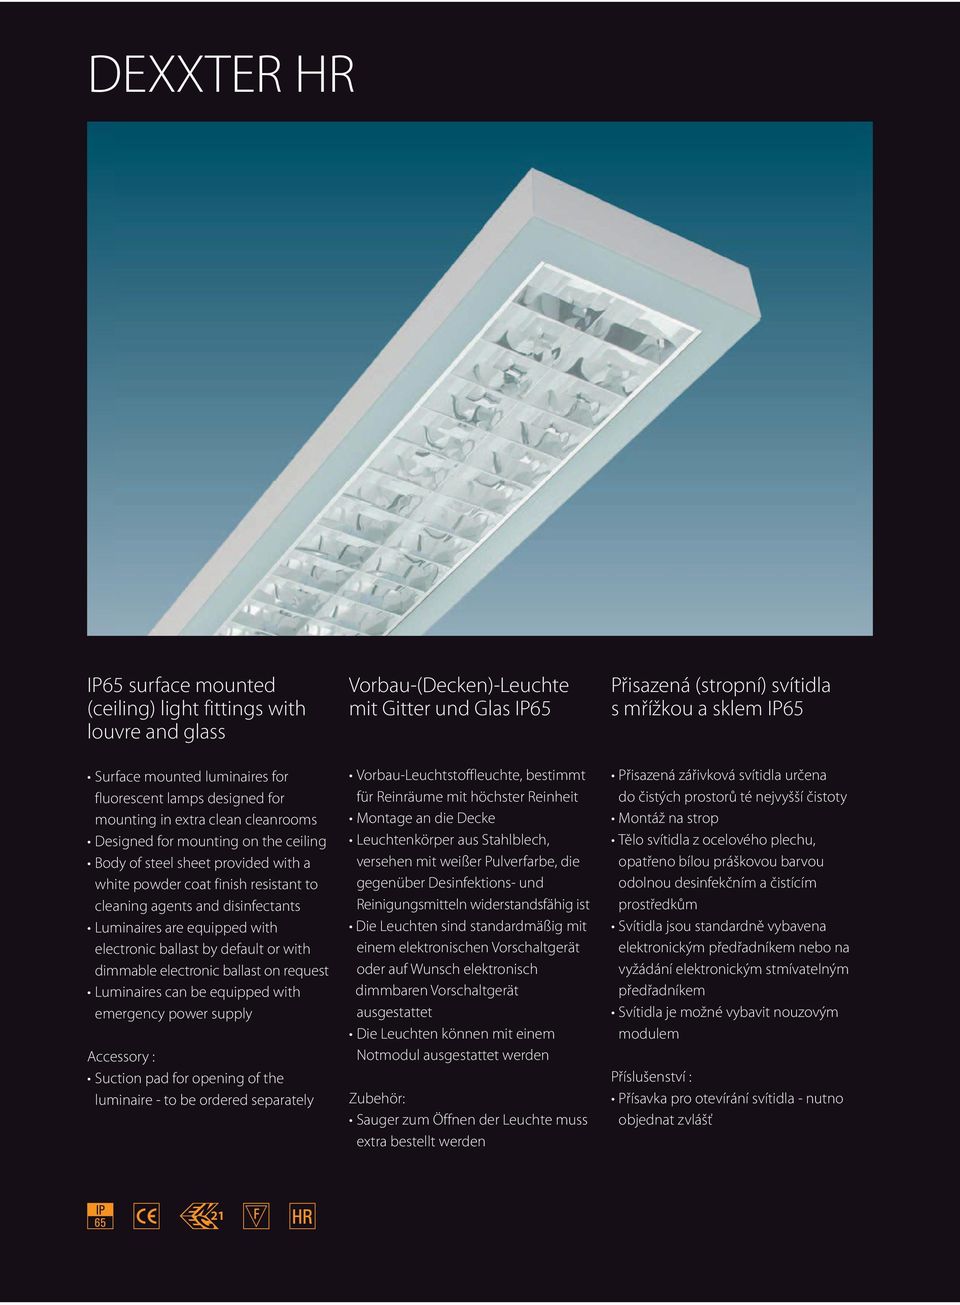 electronic ballast on request Luminaires can be equipped with emergency power supply Accessory : Suction pad for opening of the luminaire - to be ordered separately Vorbau-(Decken)-Leuchte mit Gitter